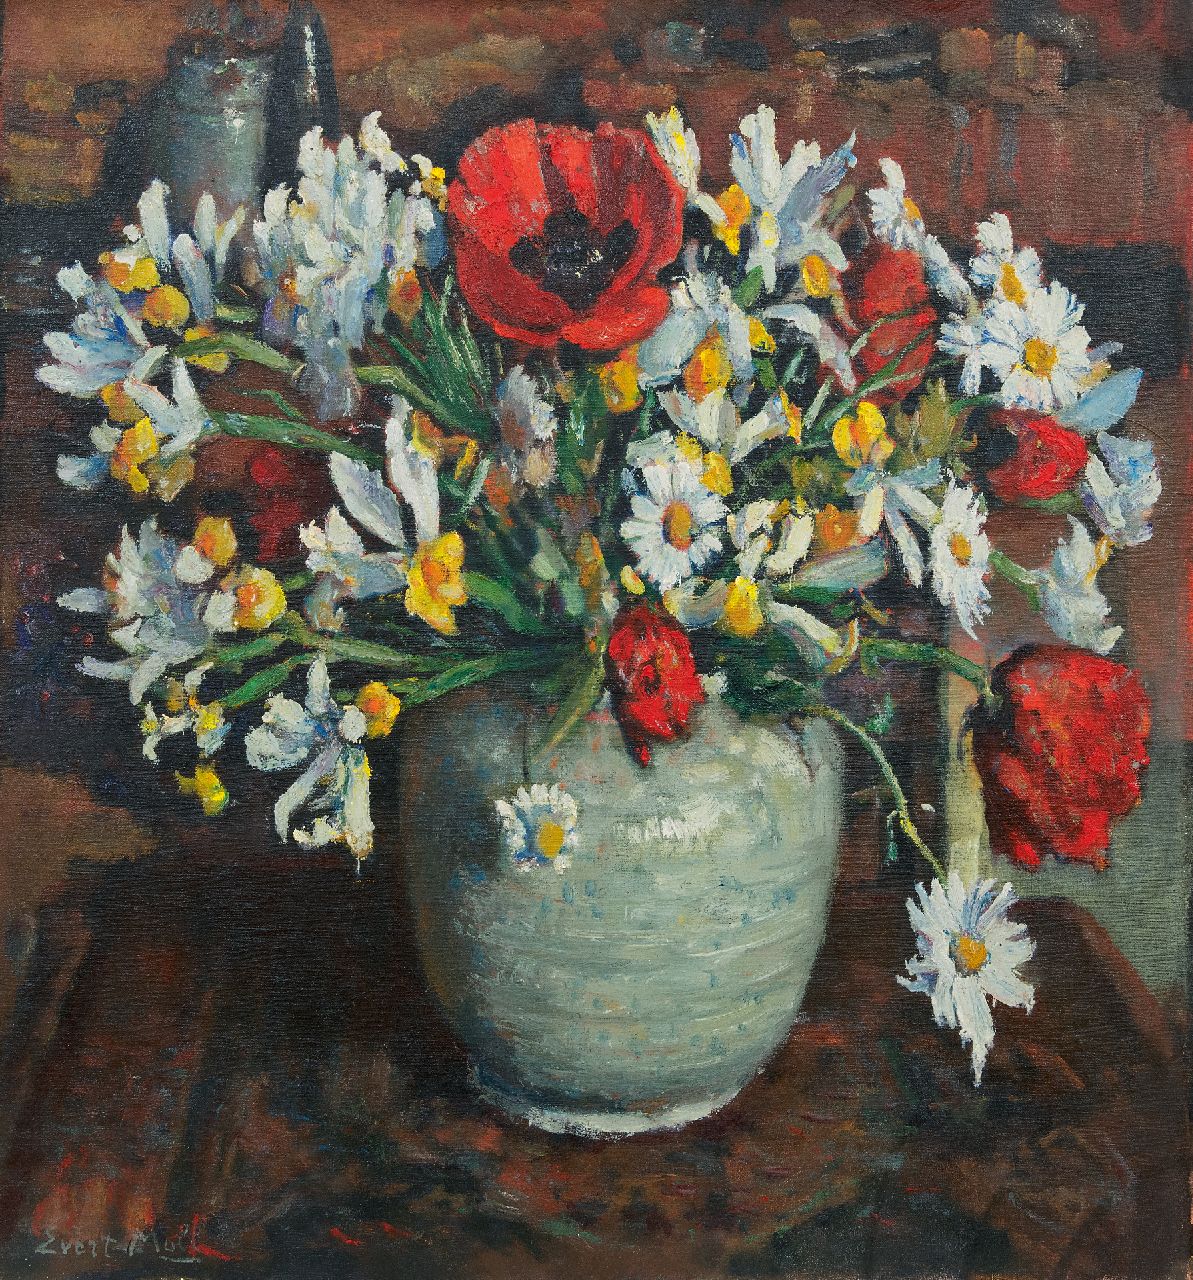 Moll E.  | Evert Moll | Paintings offered for sale | Poppies and daisies in a white vase, oil on canvas 76.0 x 70.2 cm, signed l.l.